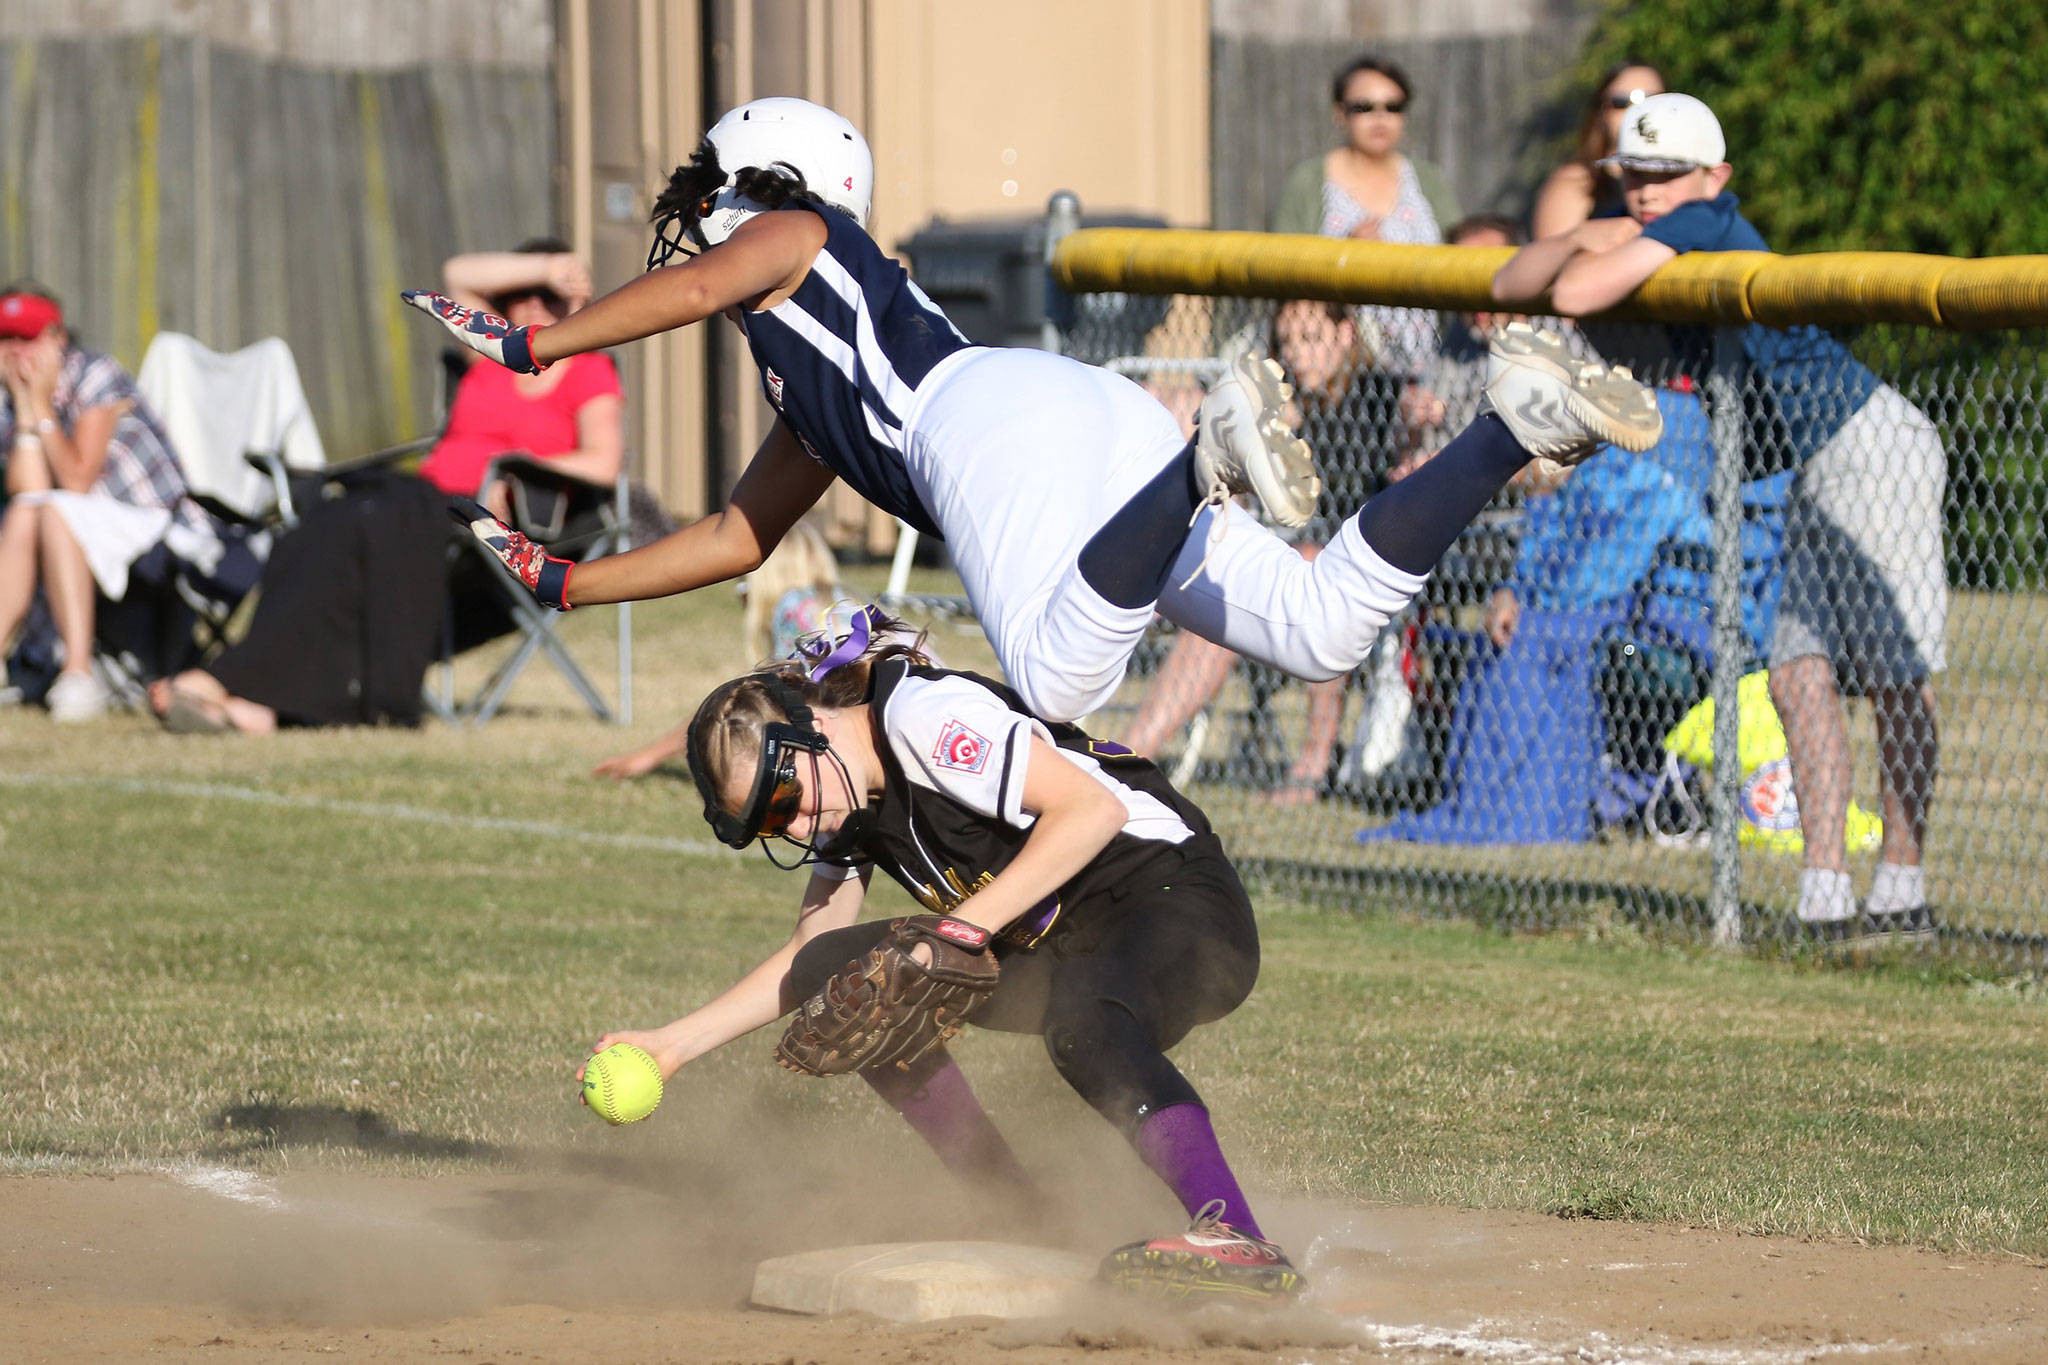 Mill Creek’s Simone Williams, top, collides with Emily Wilson at first base in Thursday’s game. Williams was out on the play. (Photo by John Fisken)